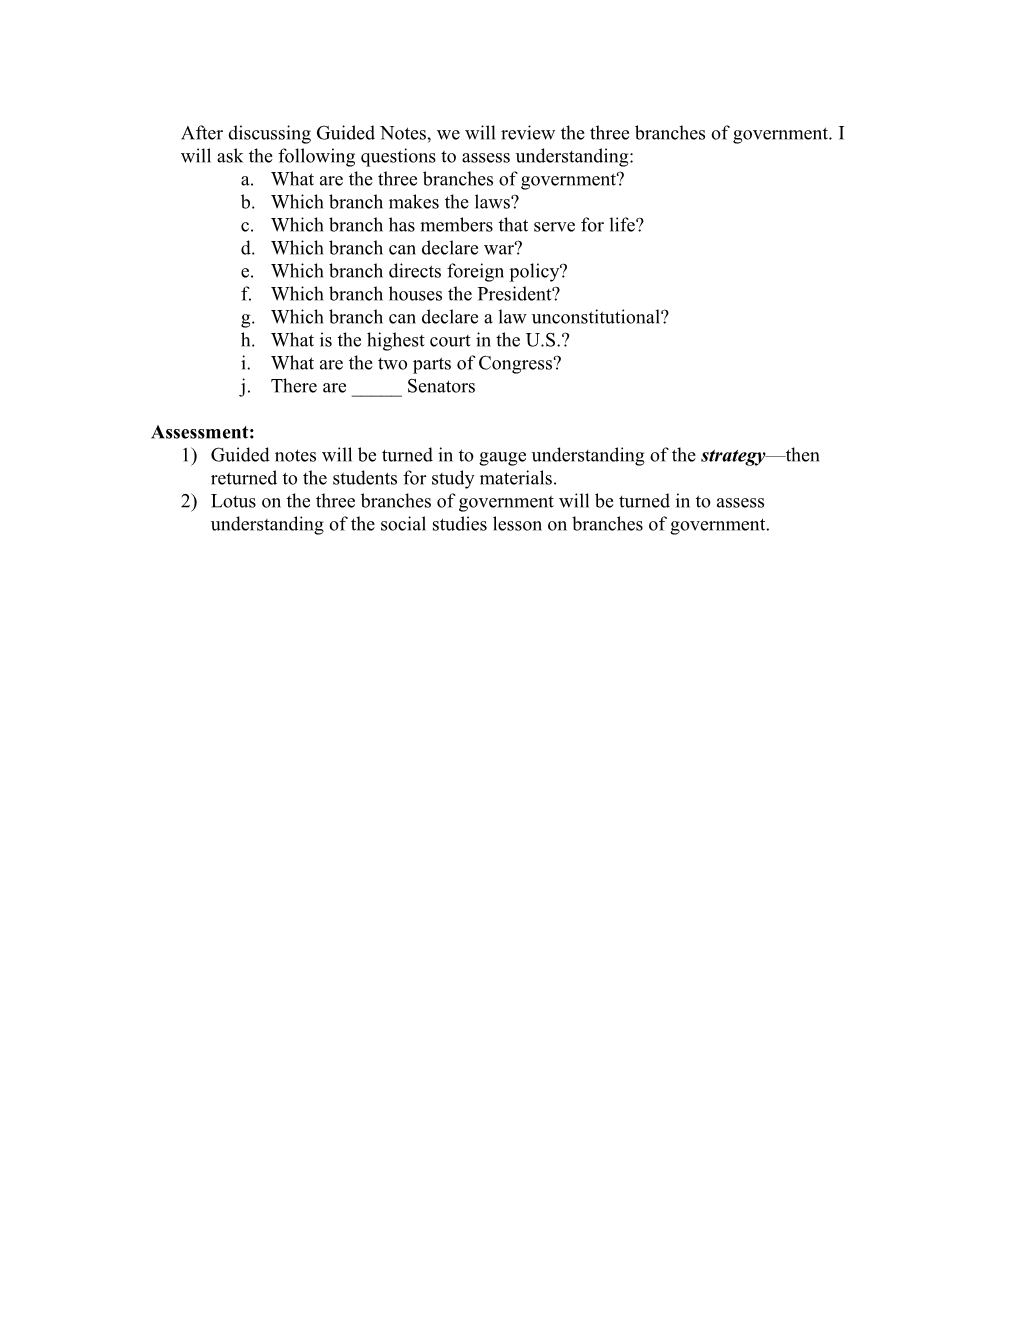 EDU 320 ACTUAL Branches Of Government Lesson Plan